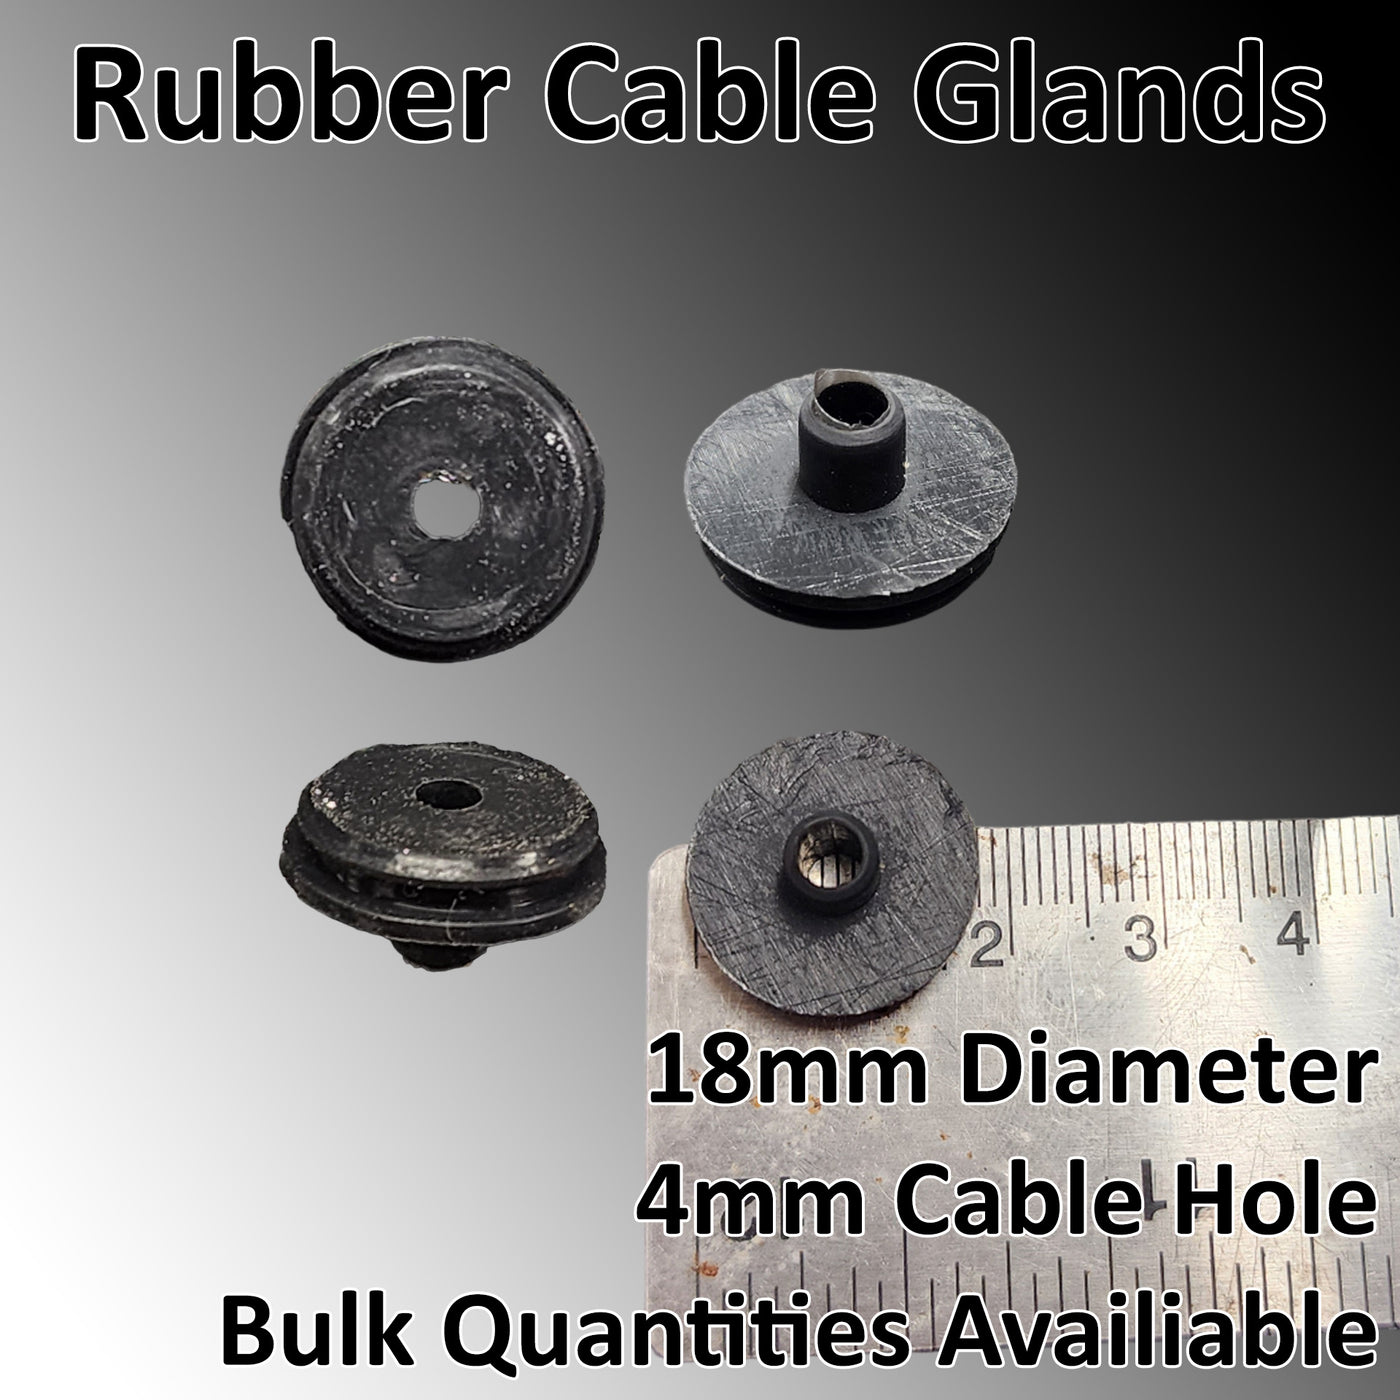 Rubber Cable Glands